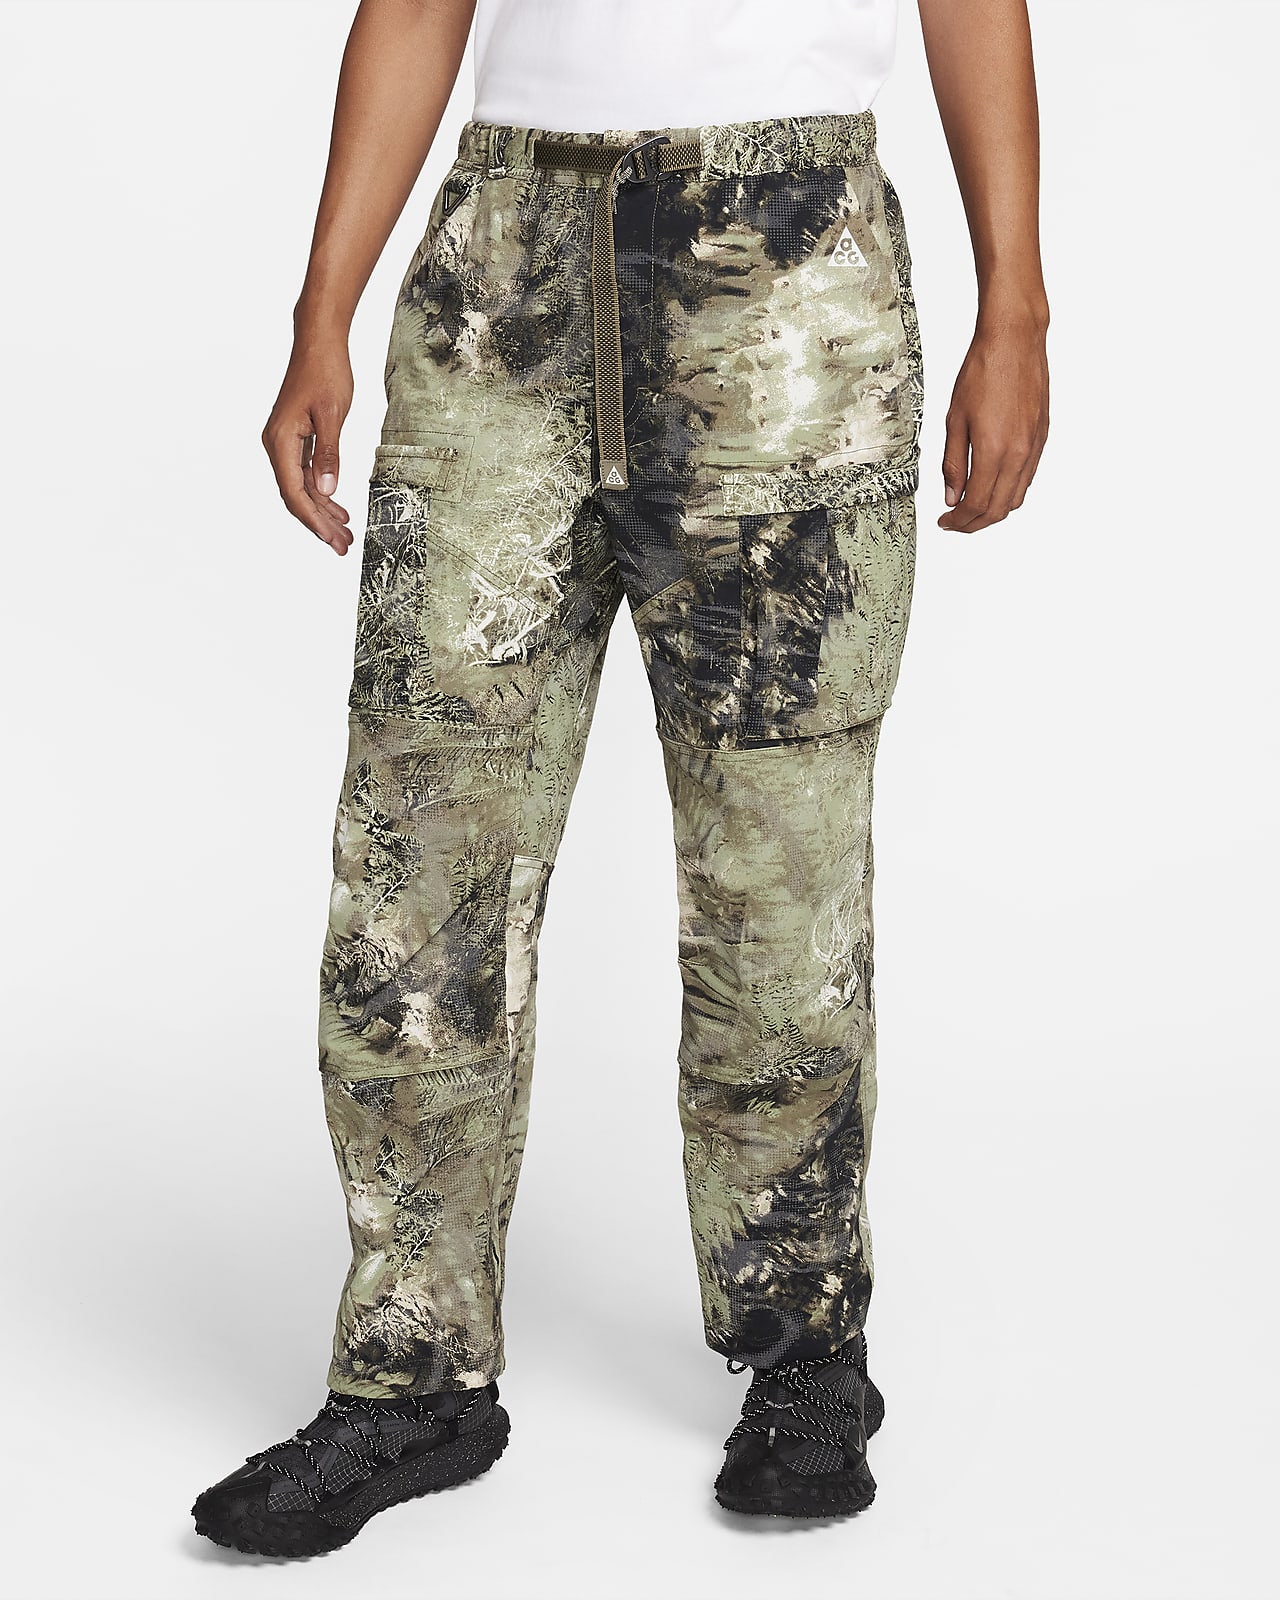 Black Cargo Pants For Men Hip Hop Joggers With Loose Fit, Multi Pocketed  Design, Ribbon Cargo Trousers Primark, And Casual Streetwear Style Sporty  And Stylish 201110 From Mu03, $22.98 | DHgate.Com